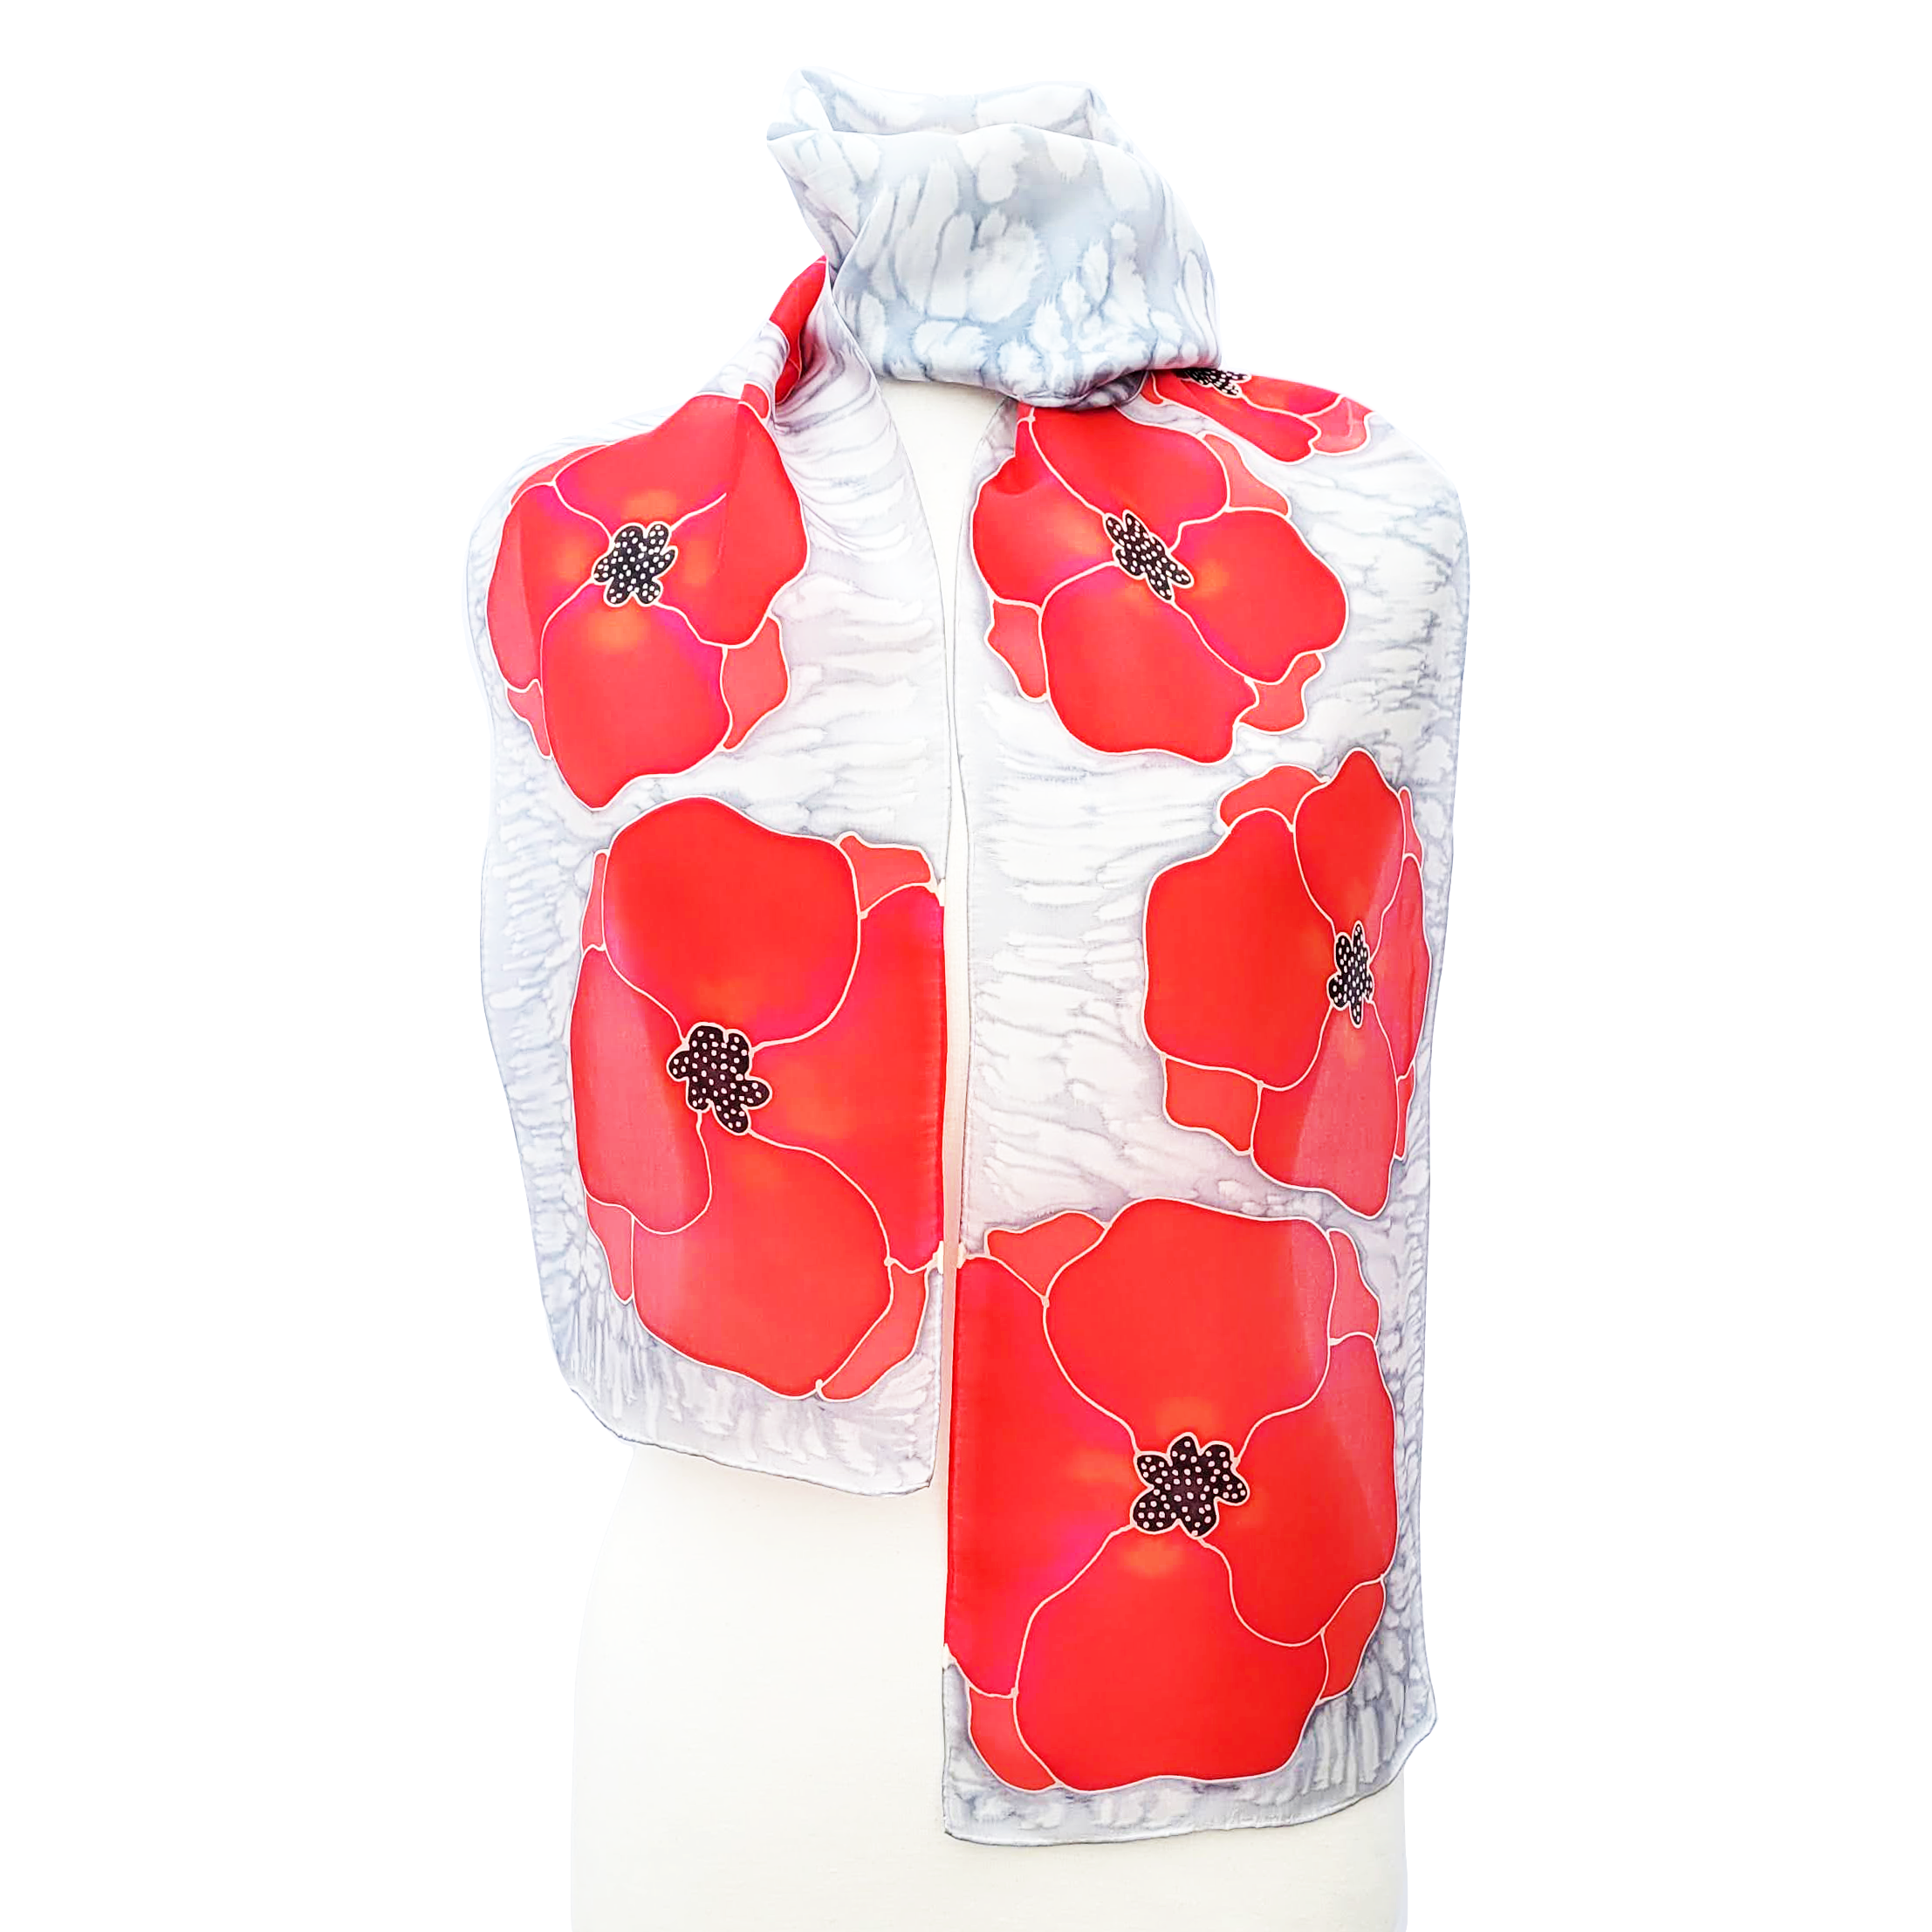 long silk scarf hand painted red poppies for Remembrance Day handmade by Lynne Kiel